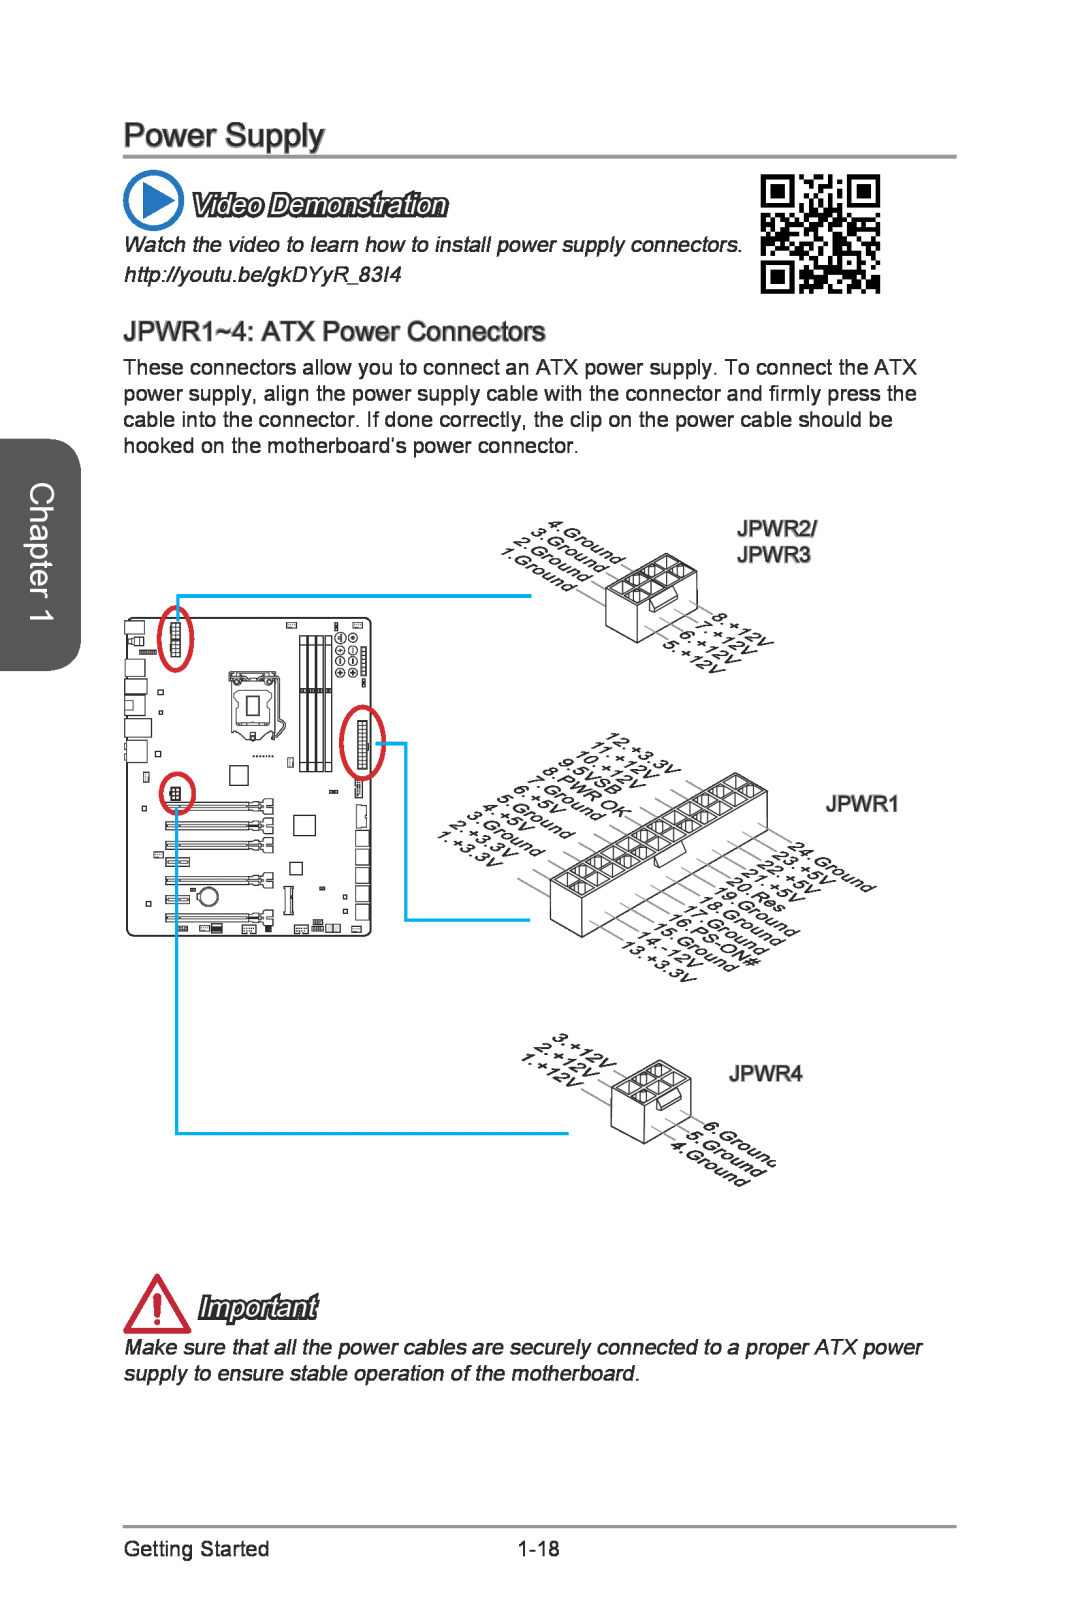 MSI Z87-XPOWER manual Power Supply, JPWR1~4 ATX Power Connectors, Chapter, Video Demonstration 